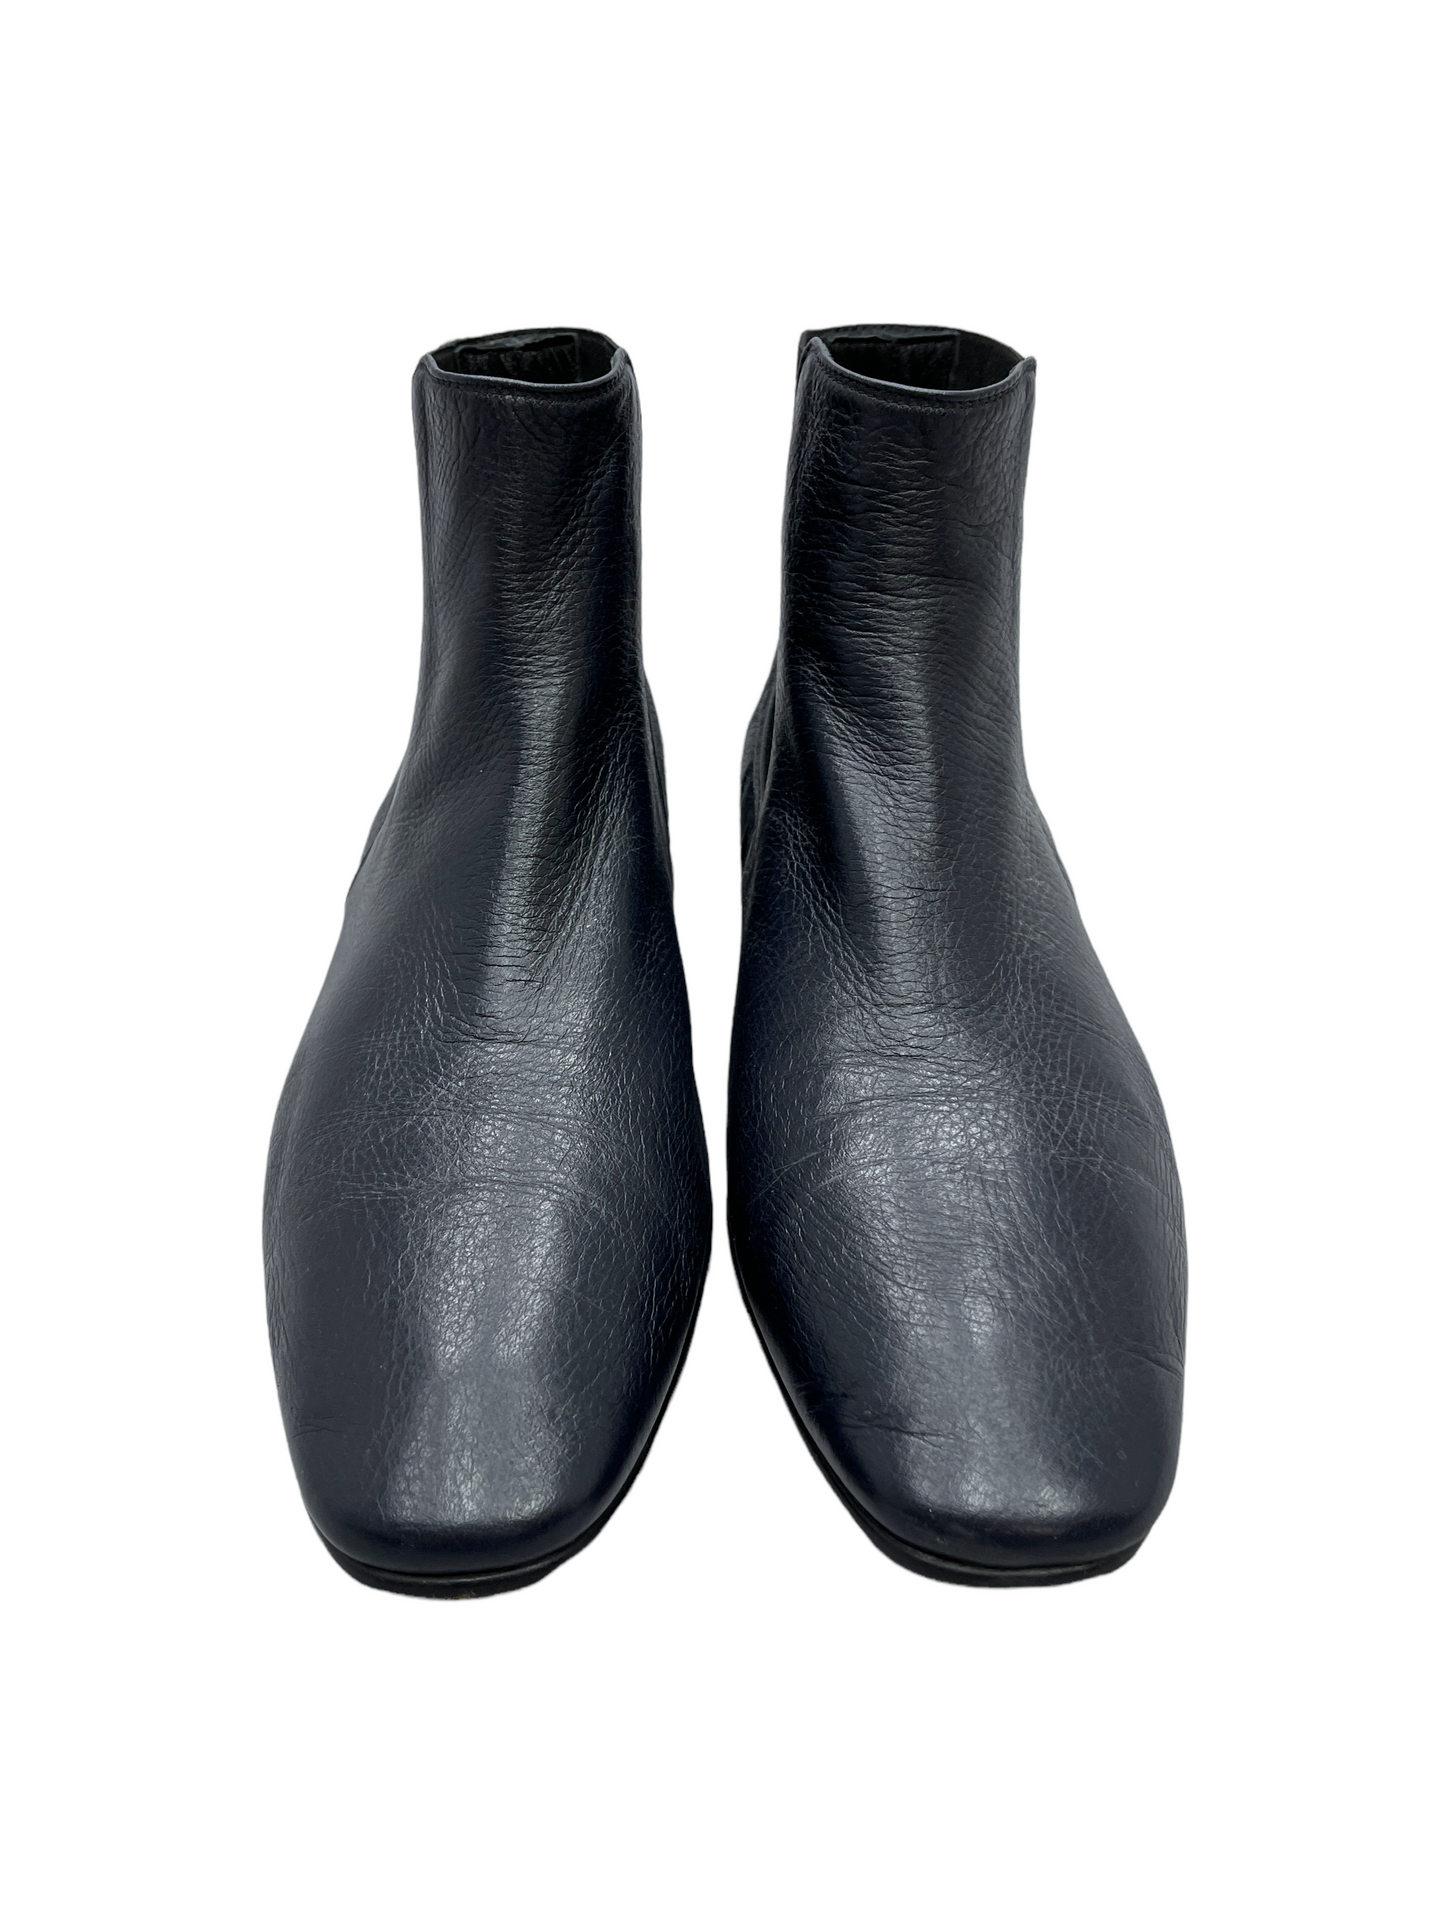 Dolce & Gabbana Navy Blue Deerskin Leather Chelsea Boots 11 US - Genuine Design Luxury Consignment for Men. New & Pre-Owned Clothing, Shoes, & Accessories. Calgary, Canada